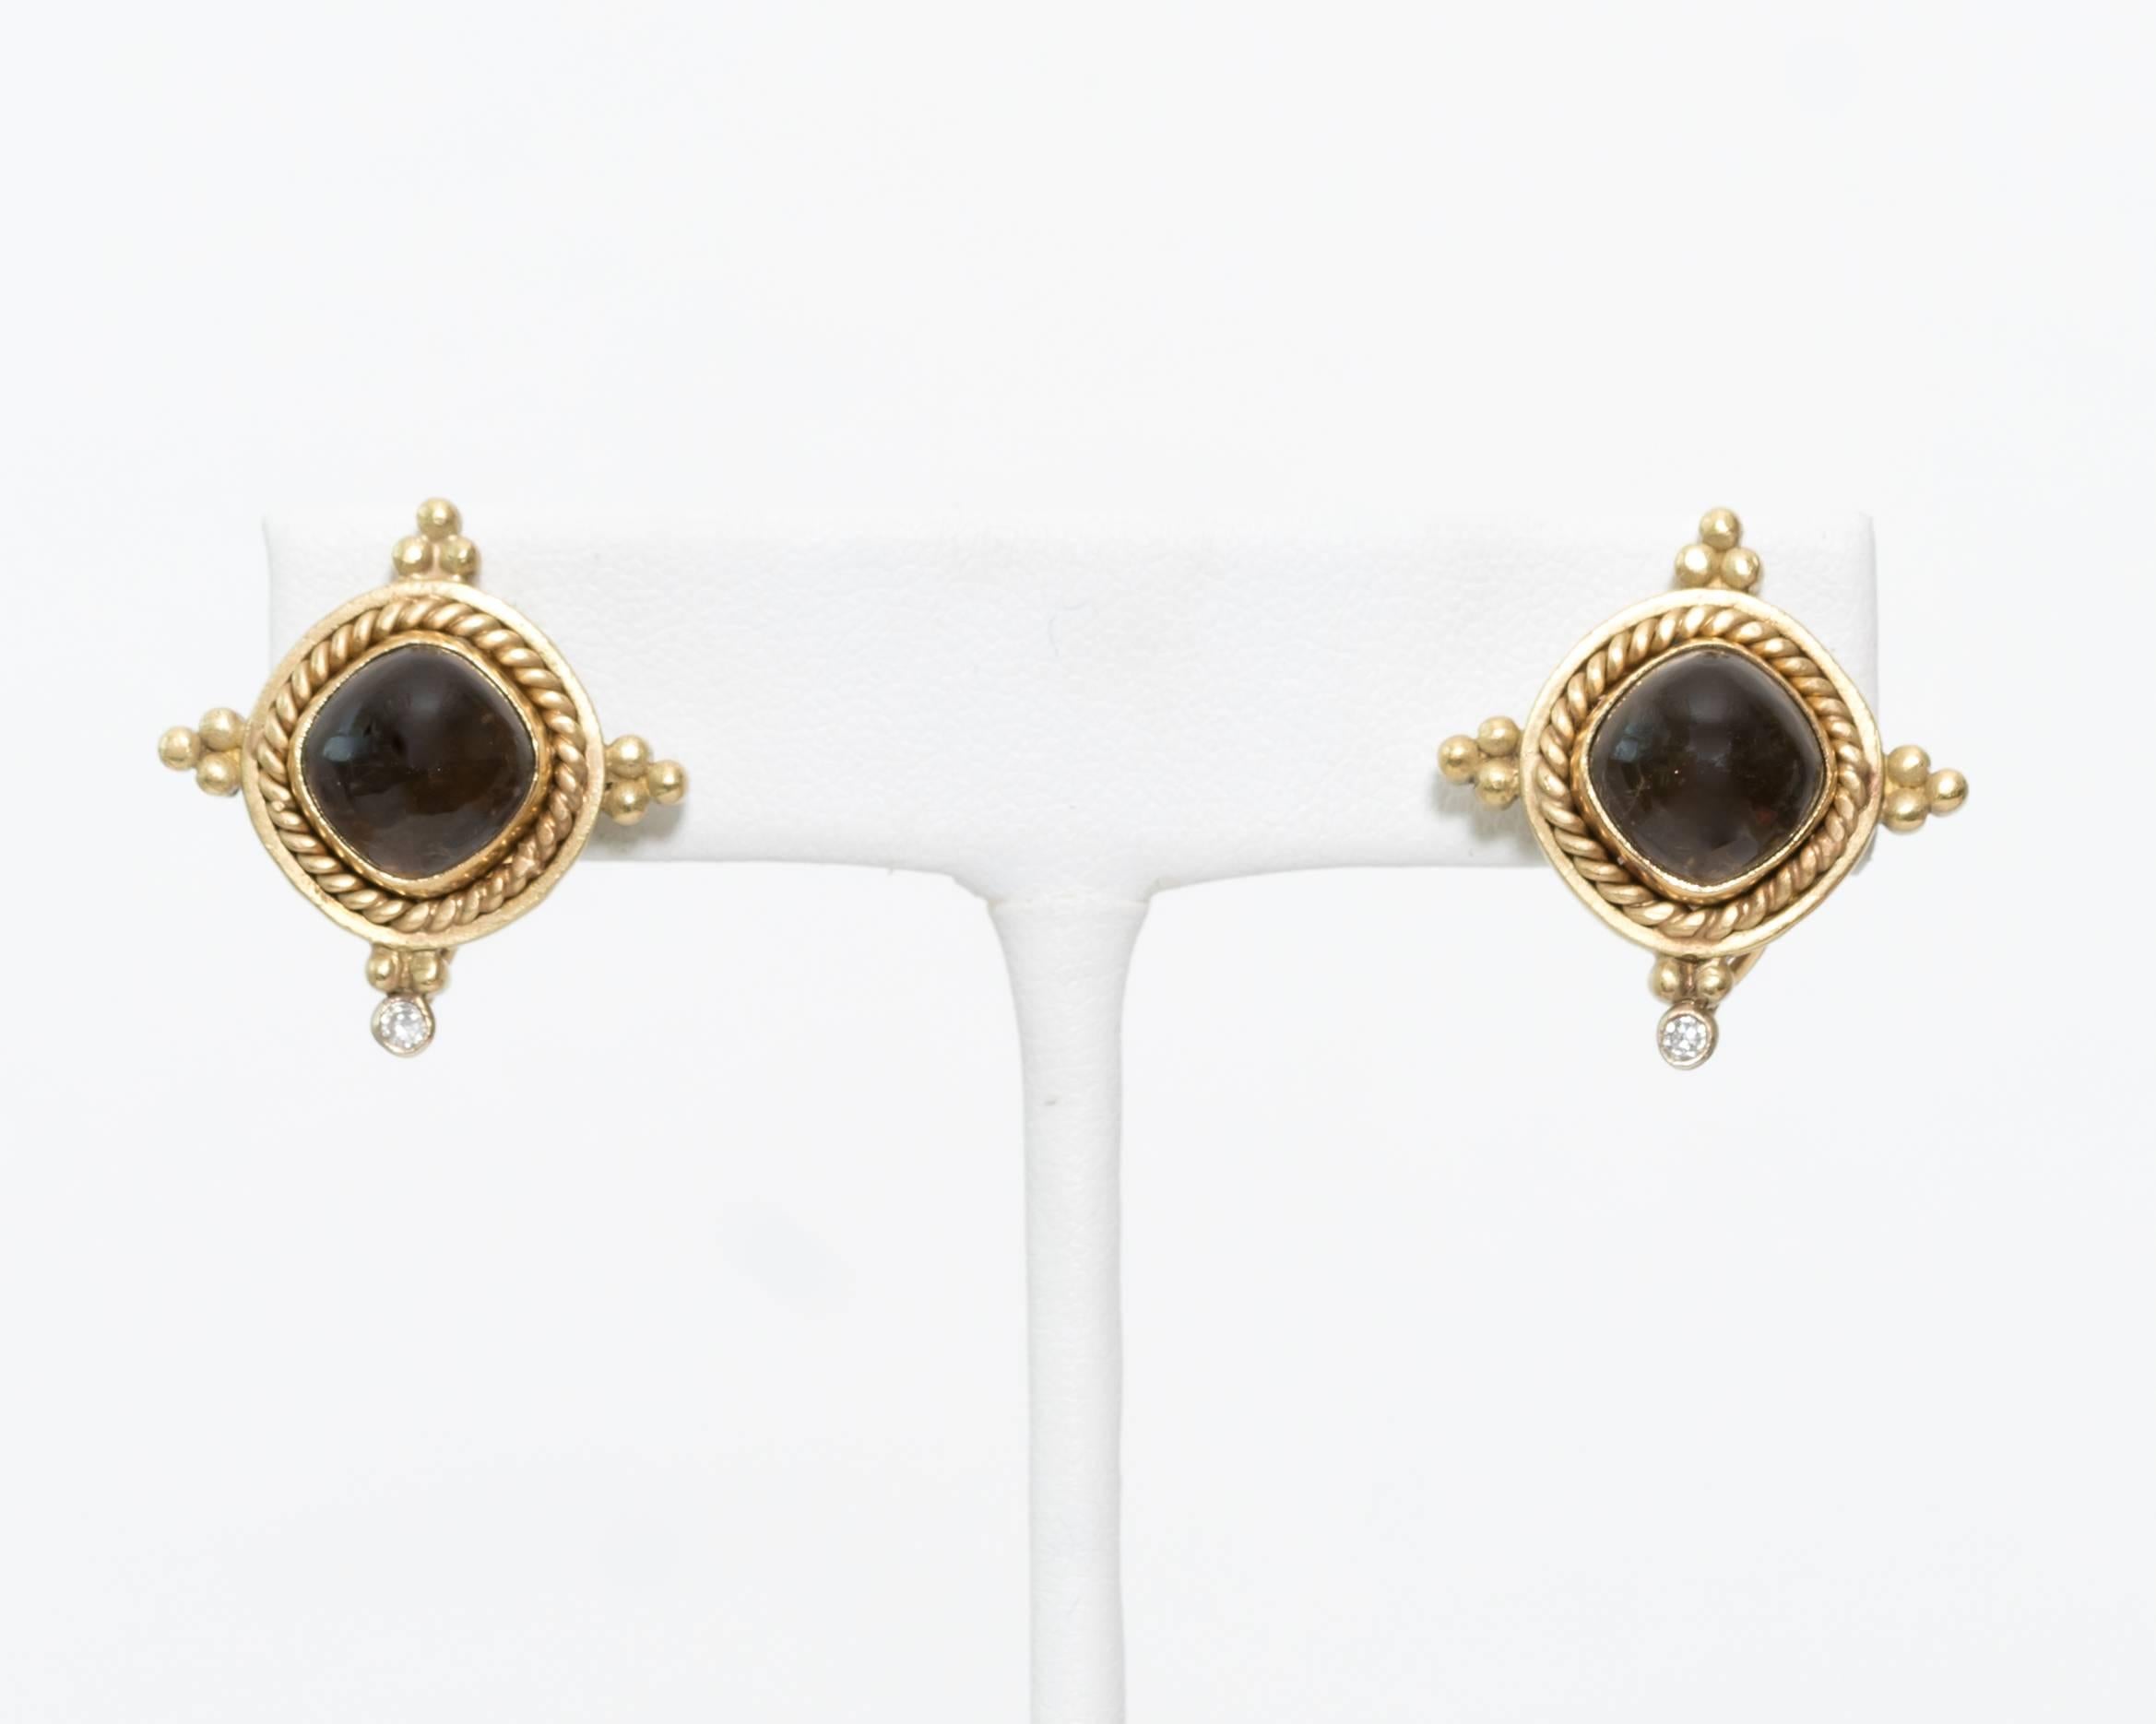 You will want to wear these classically beautiful earrings everywhere! They feature a 9 millimeter smoky quartz center stone set in 18 karat yellow gold with an accent diamond drop at the bottom of each earring. 

A gold rope motif frames each smoky